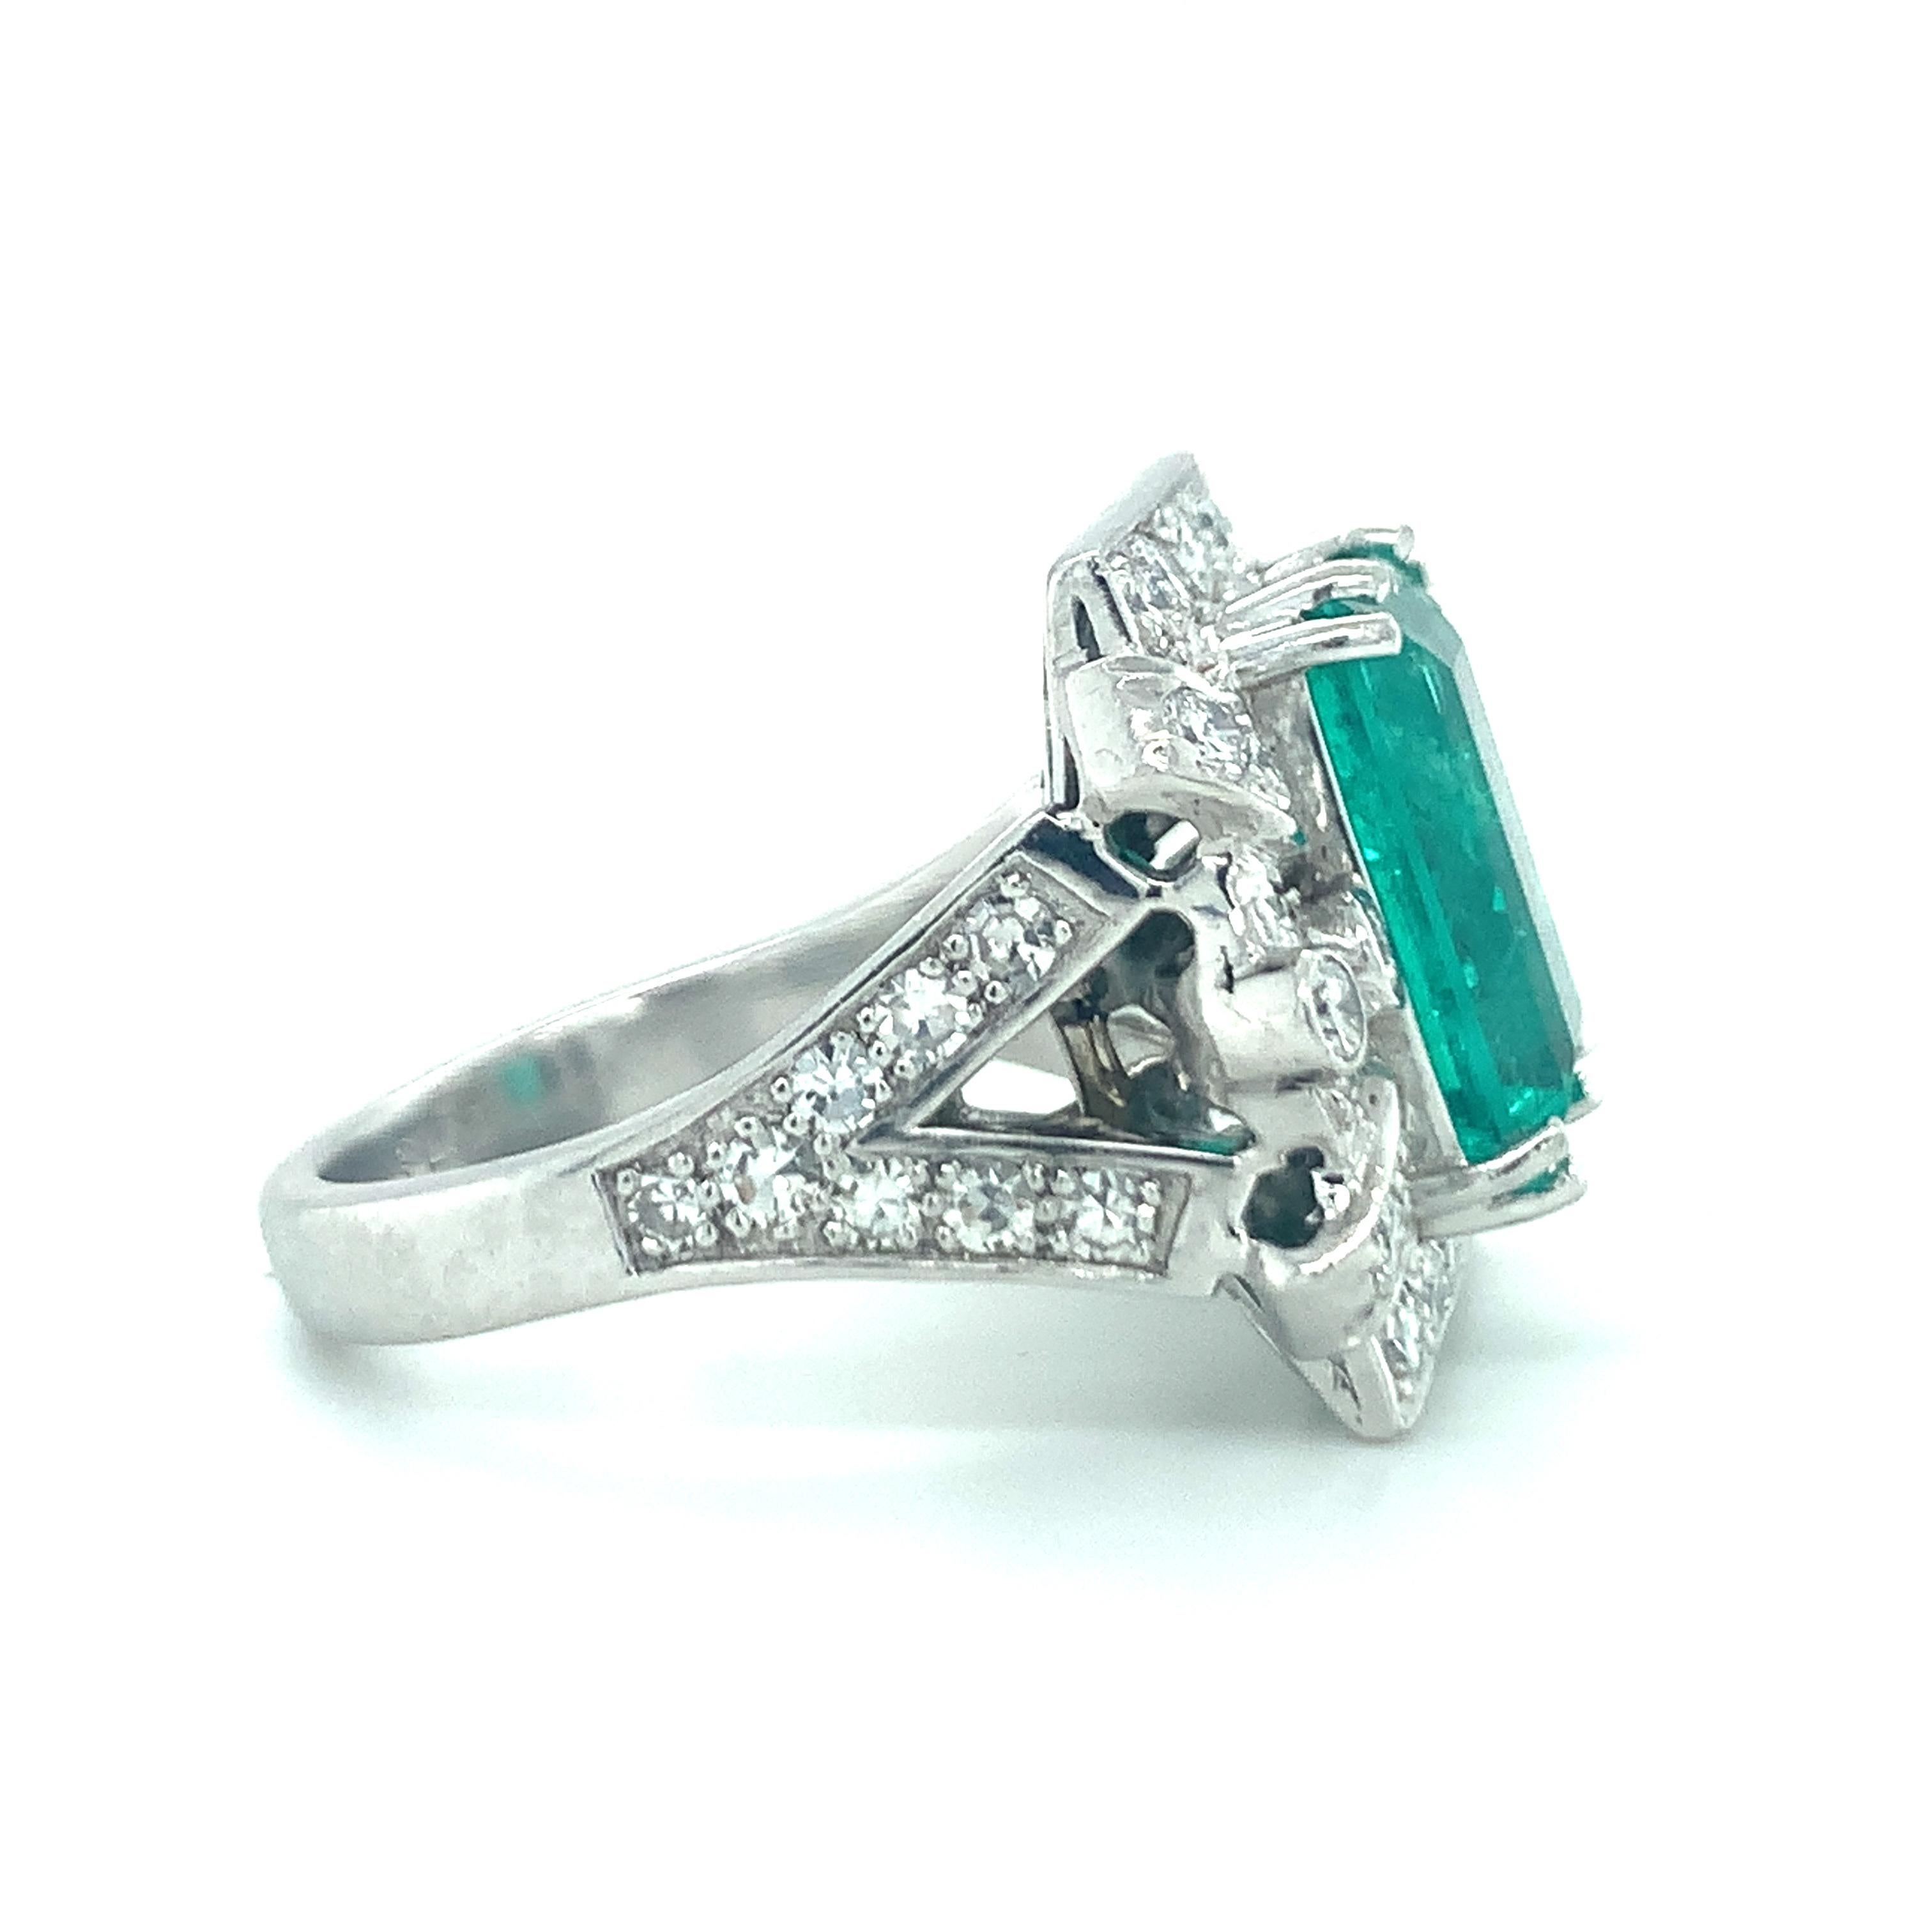 One Art Deco emerald and diamond platinum ring centering one prong and bezel set, emerald cut emerald weighing 5.50 ct. with GIA Report stating Colombian origin. The ring is accented by 42 round brilliant and single round cut diamonds weighing 1.20